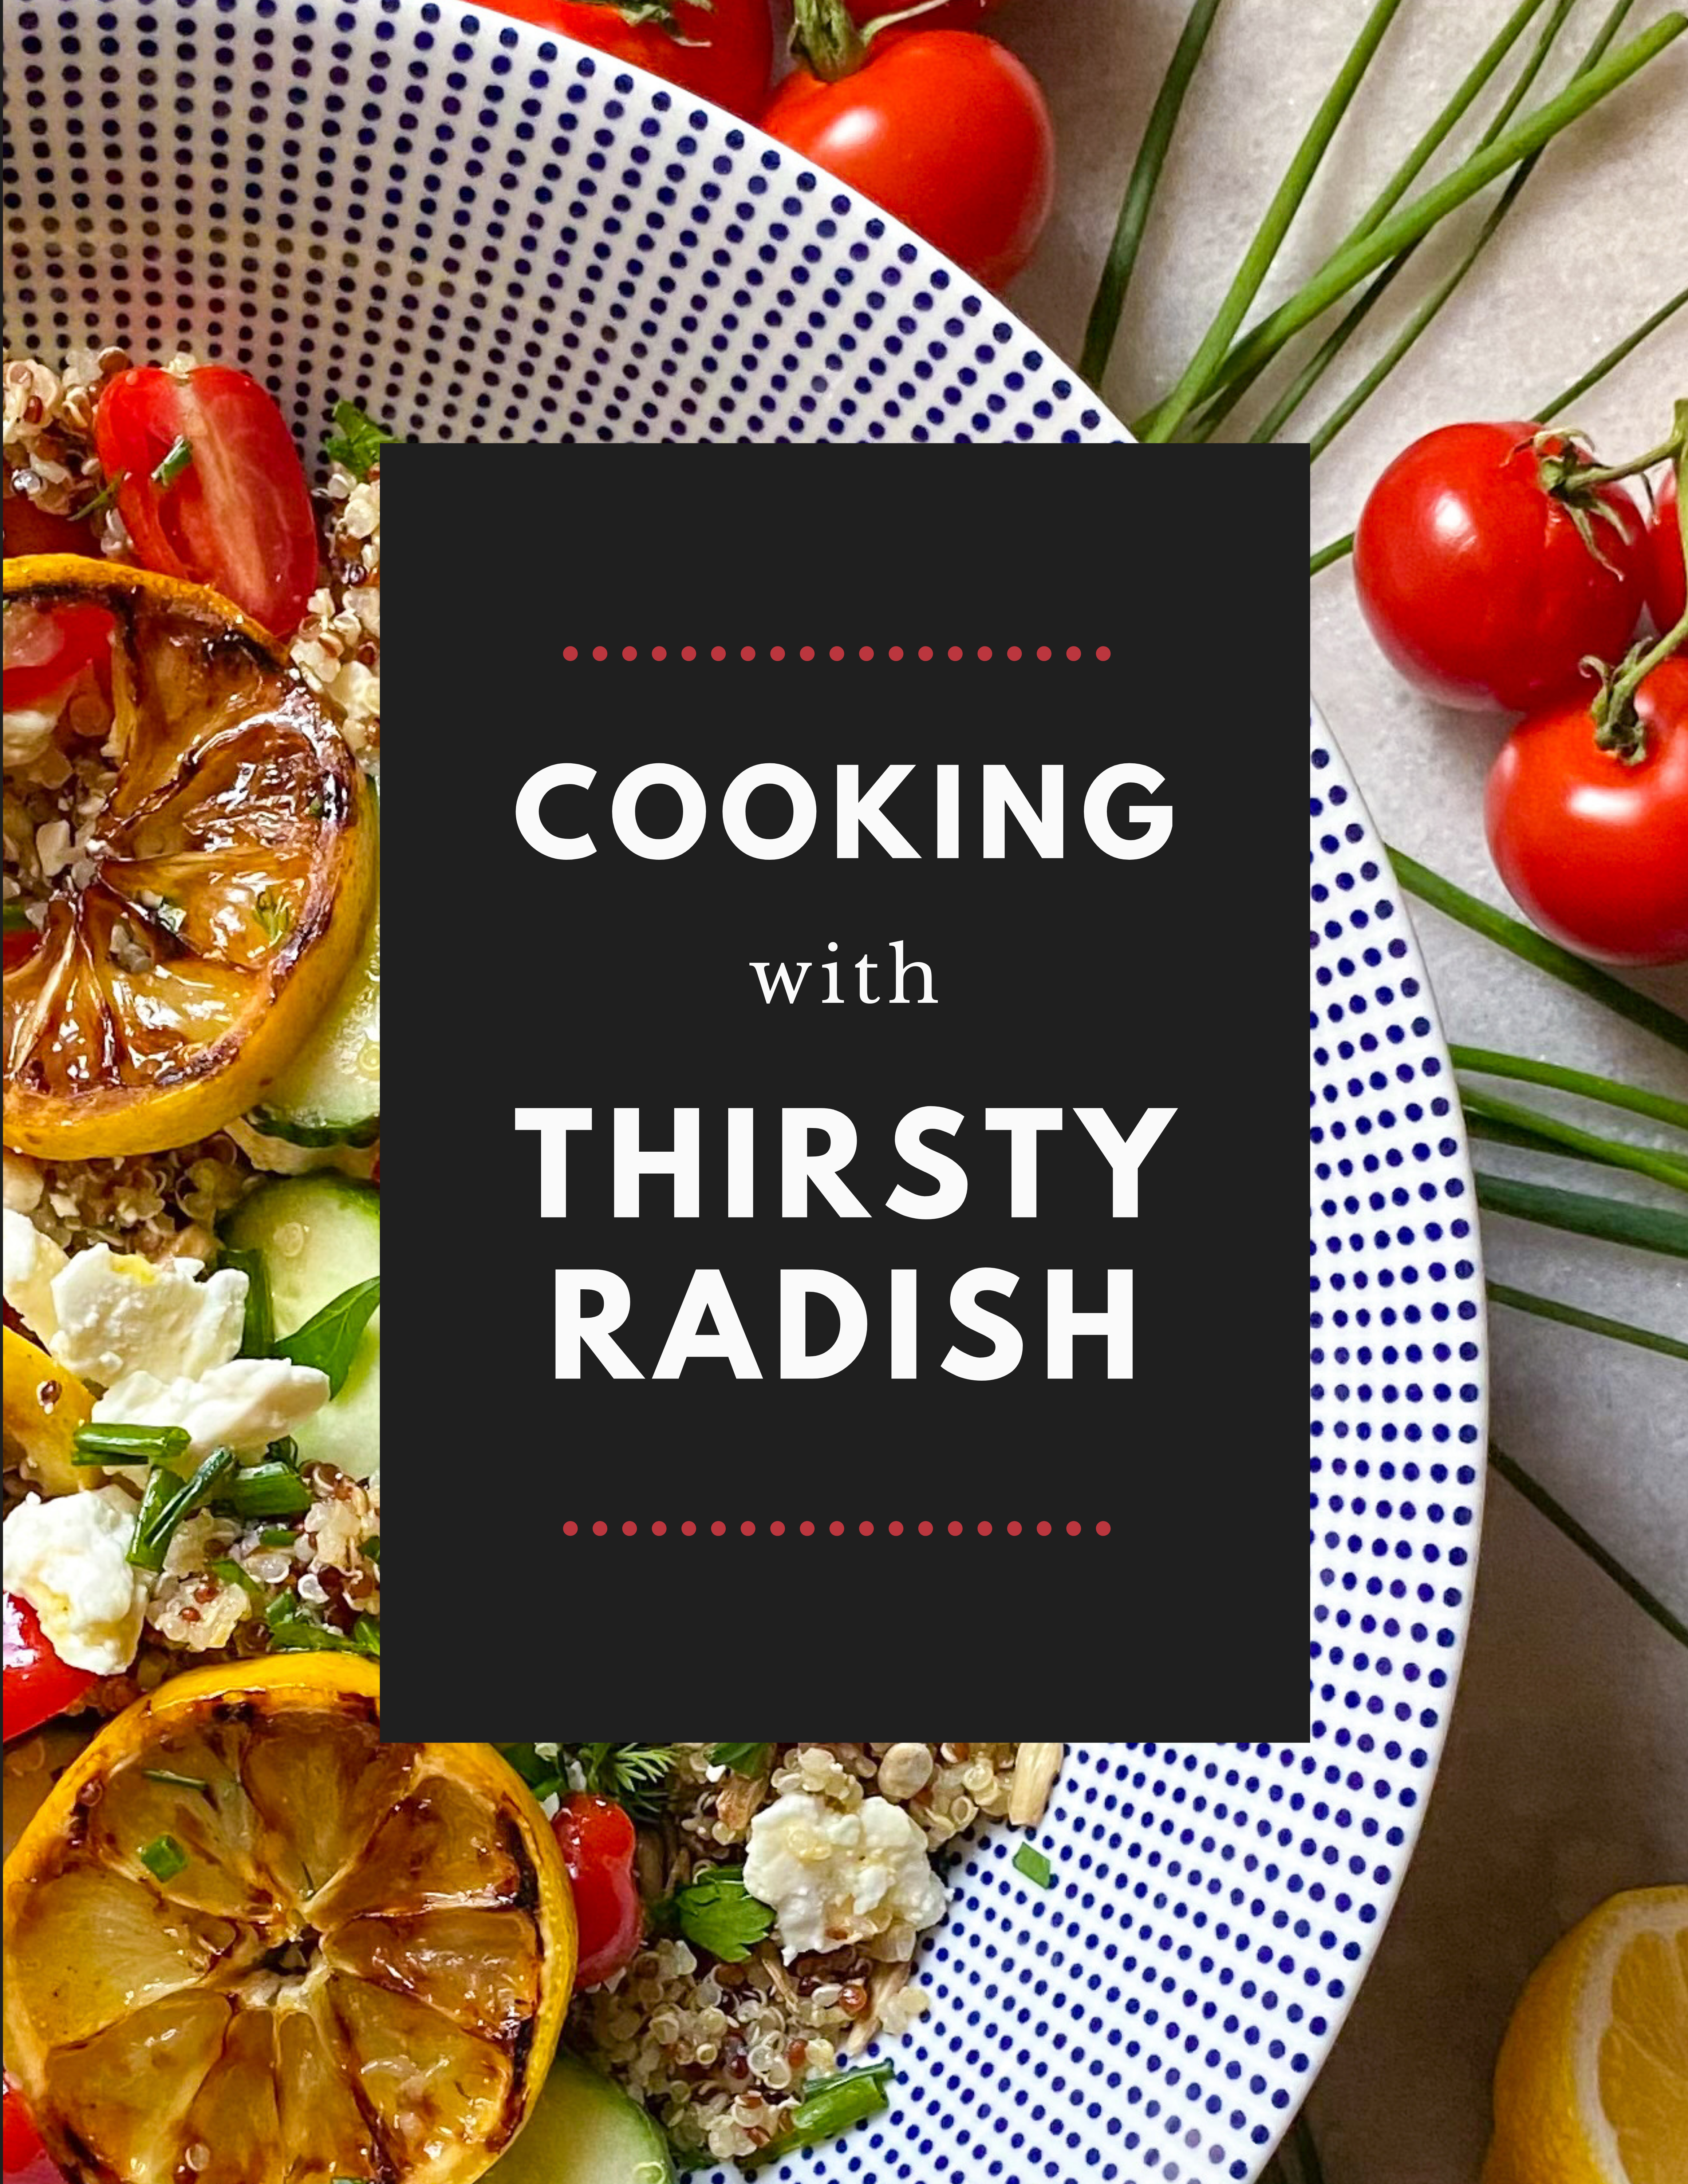 Cooking with Thirsty Radish banner in front of delicious dish with tomatoes and oranges